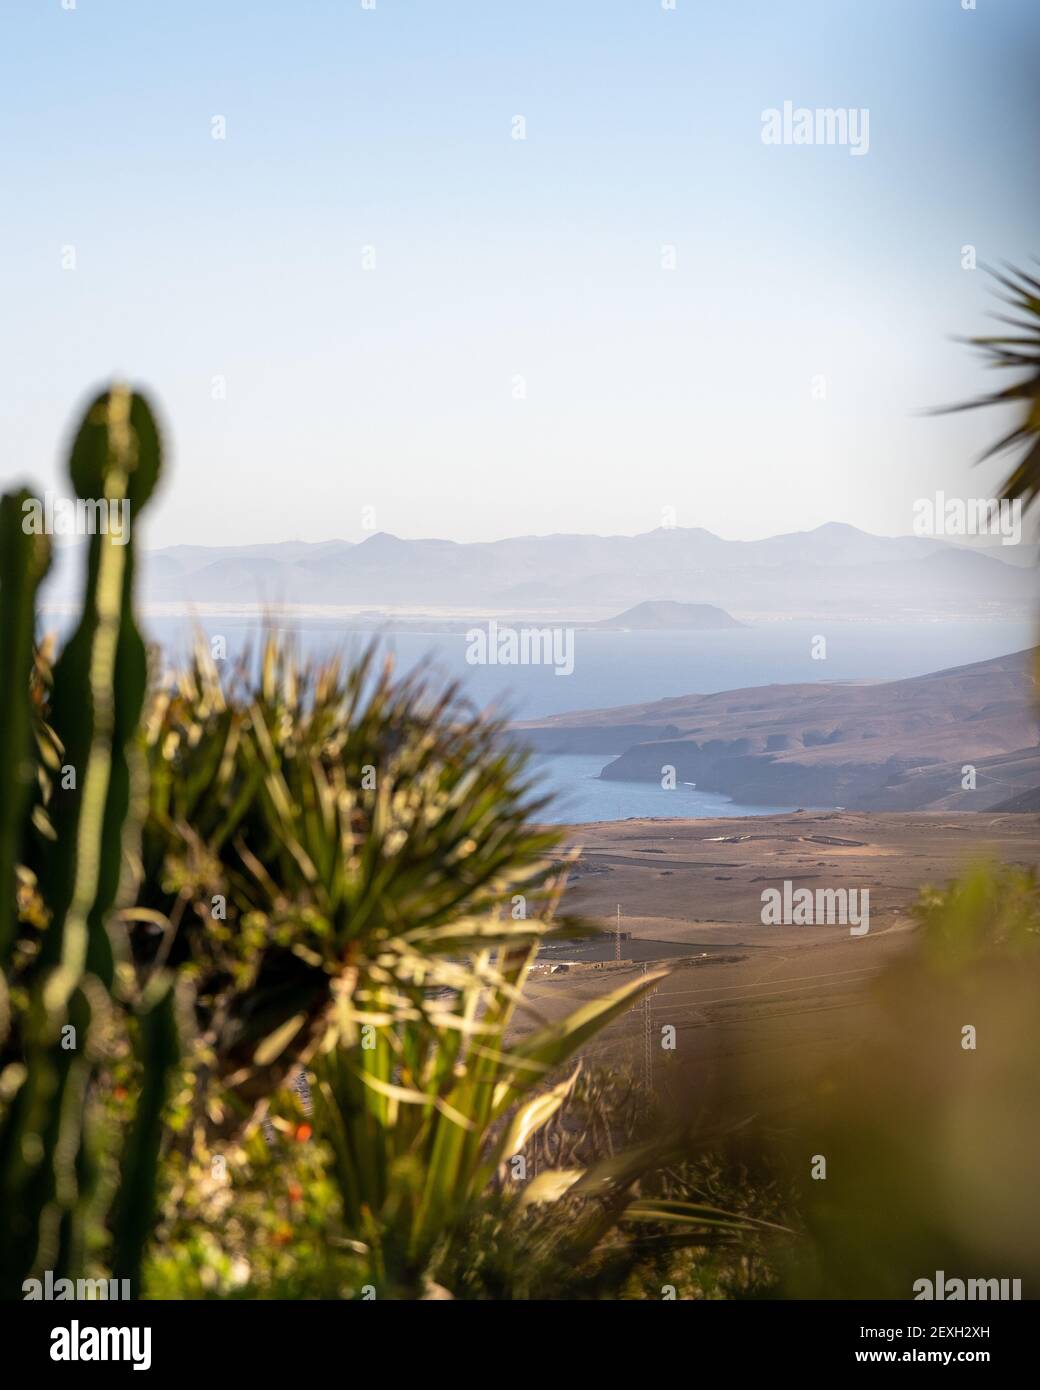 A vertical shot of a beautiful coastal landscape with plants in the foreground Stock Photo